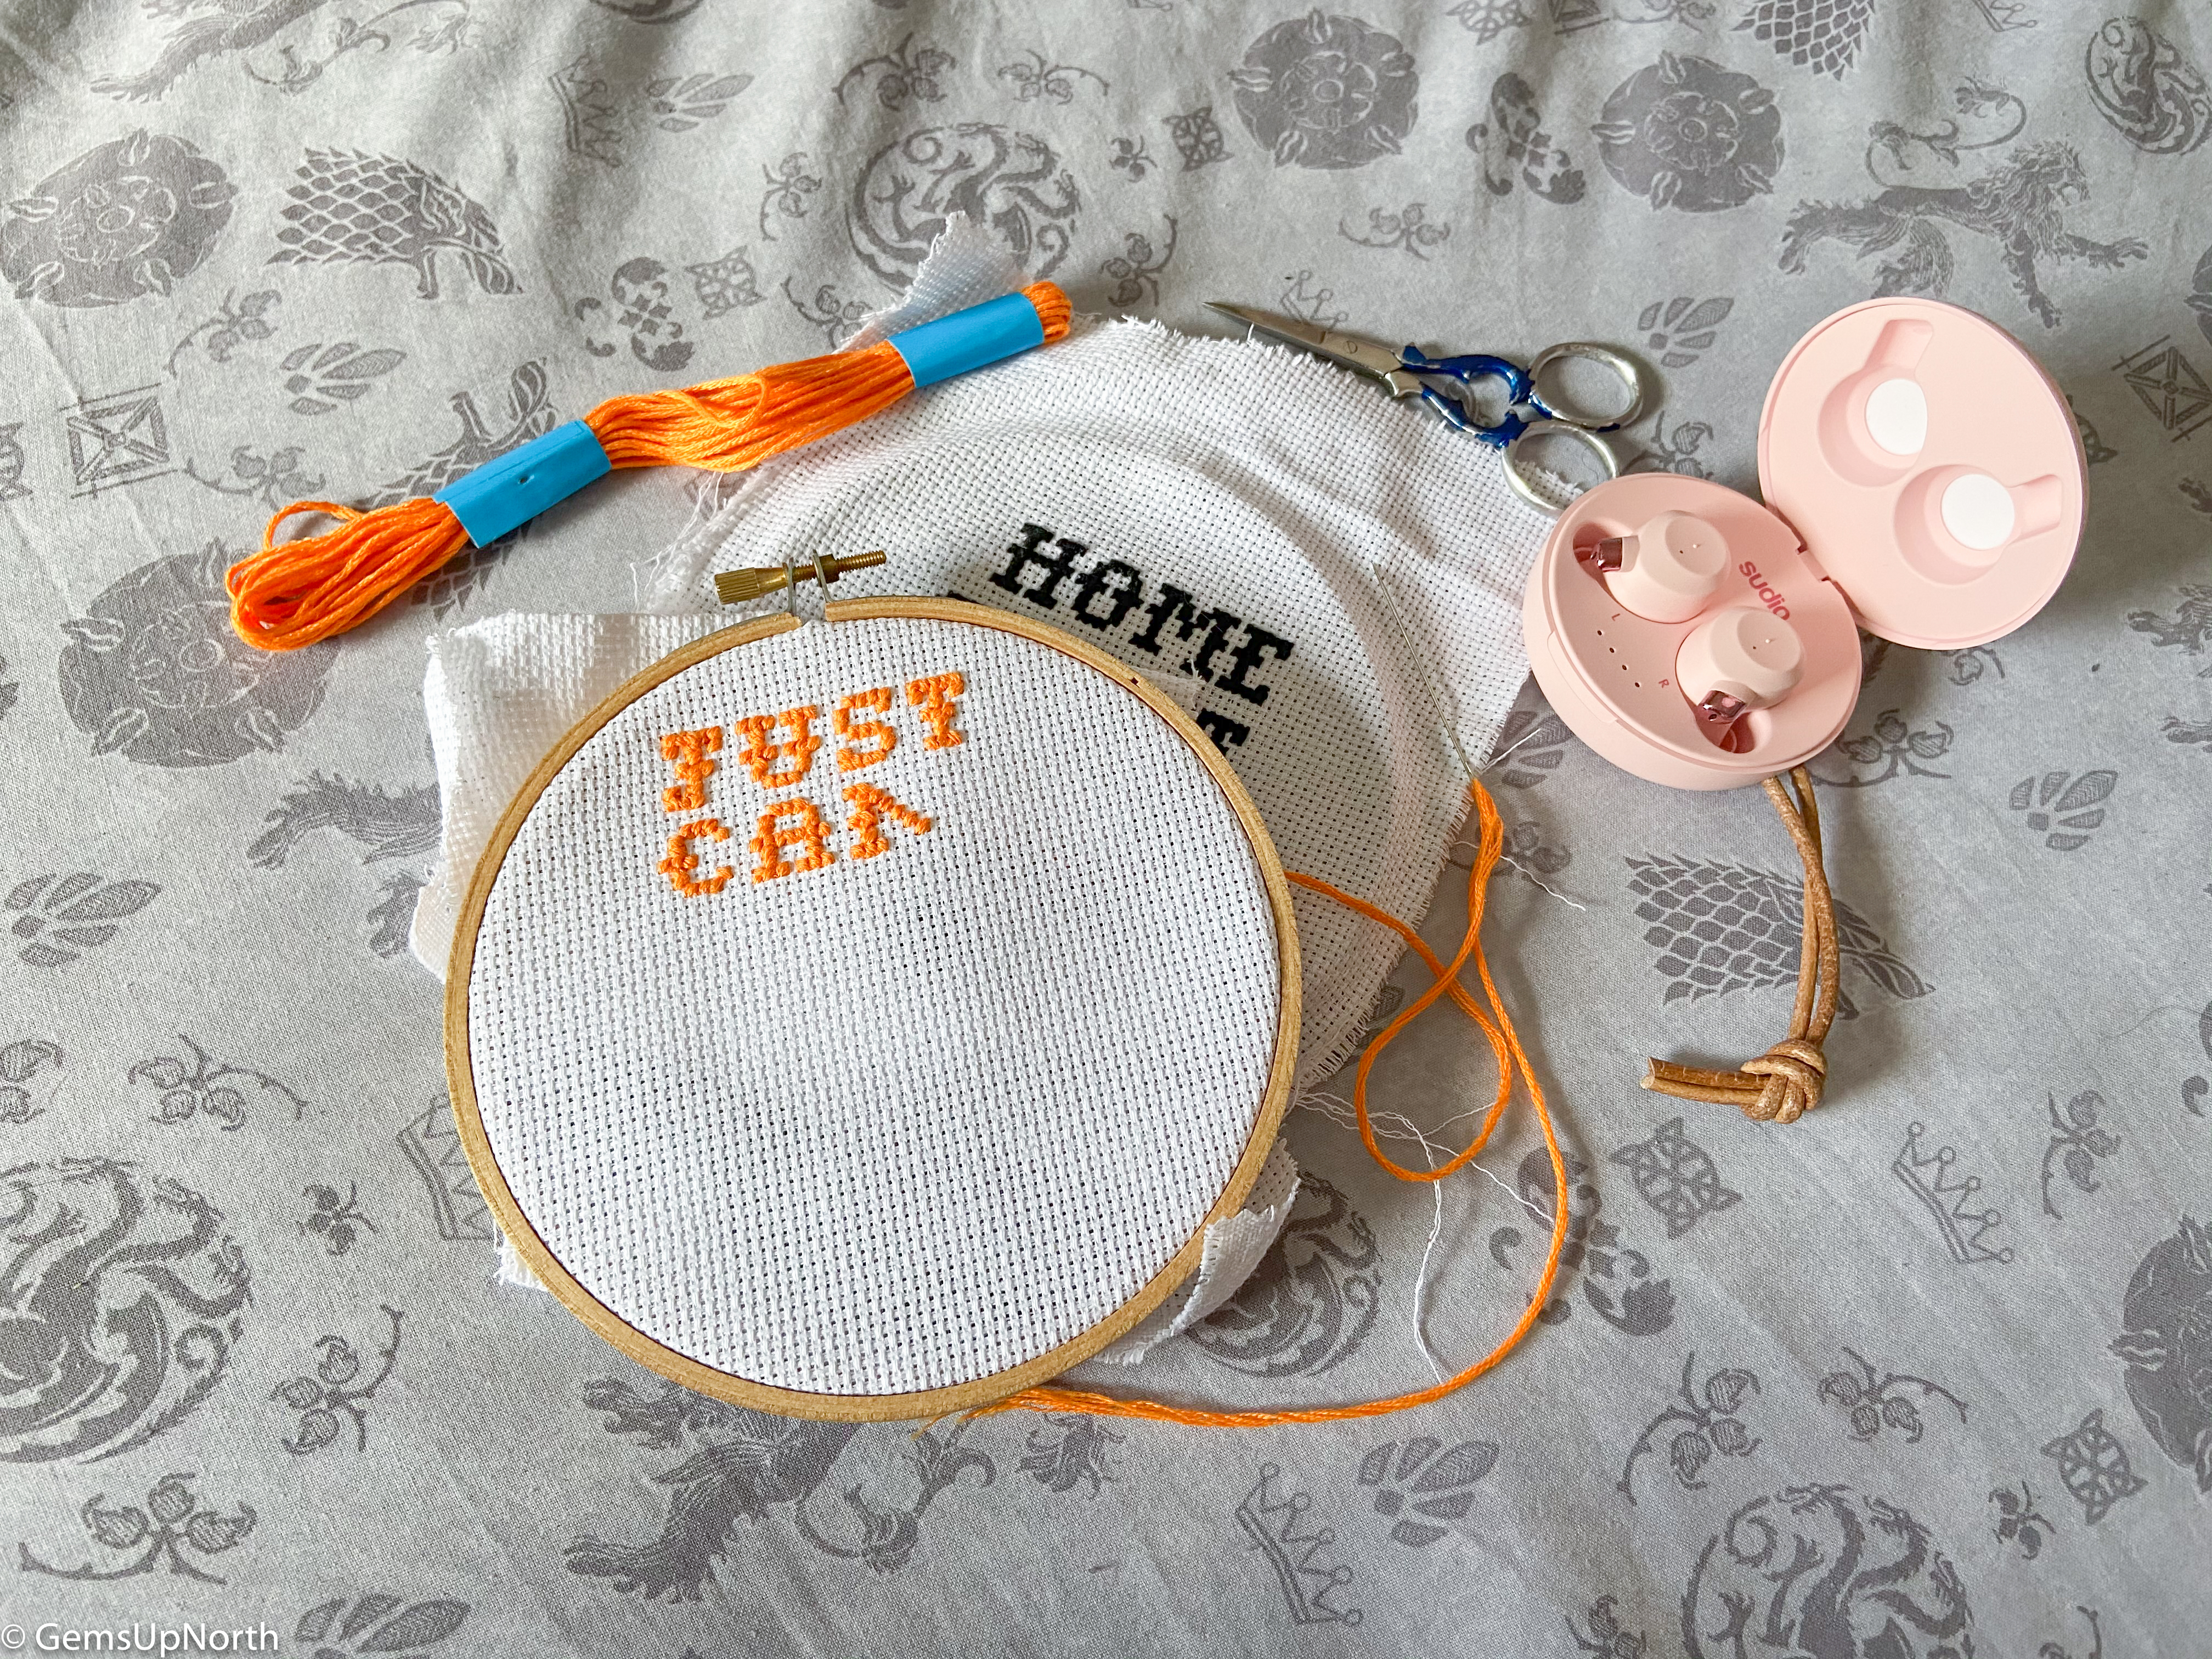 Flat lay of FEM Sudio Ear Buds with Cross stitch project.